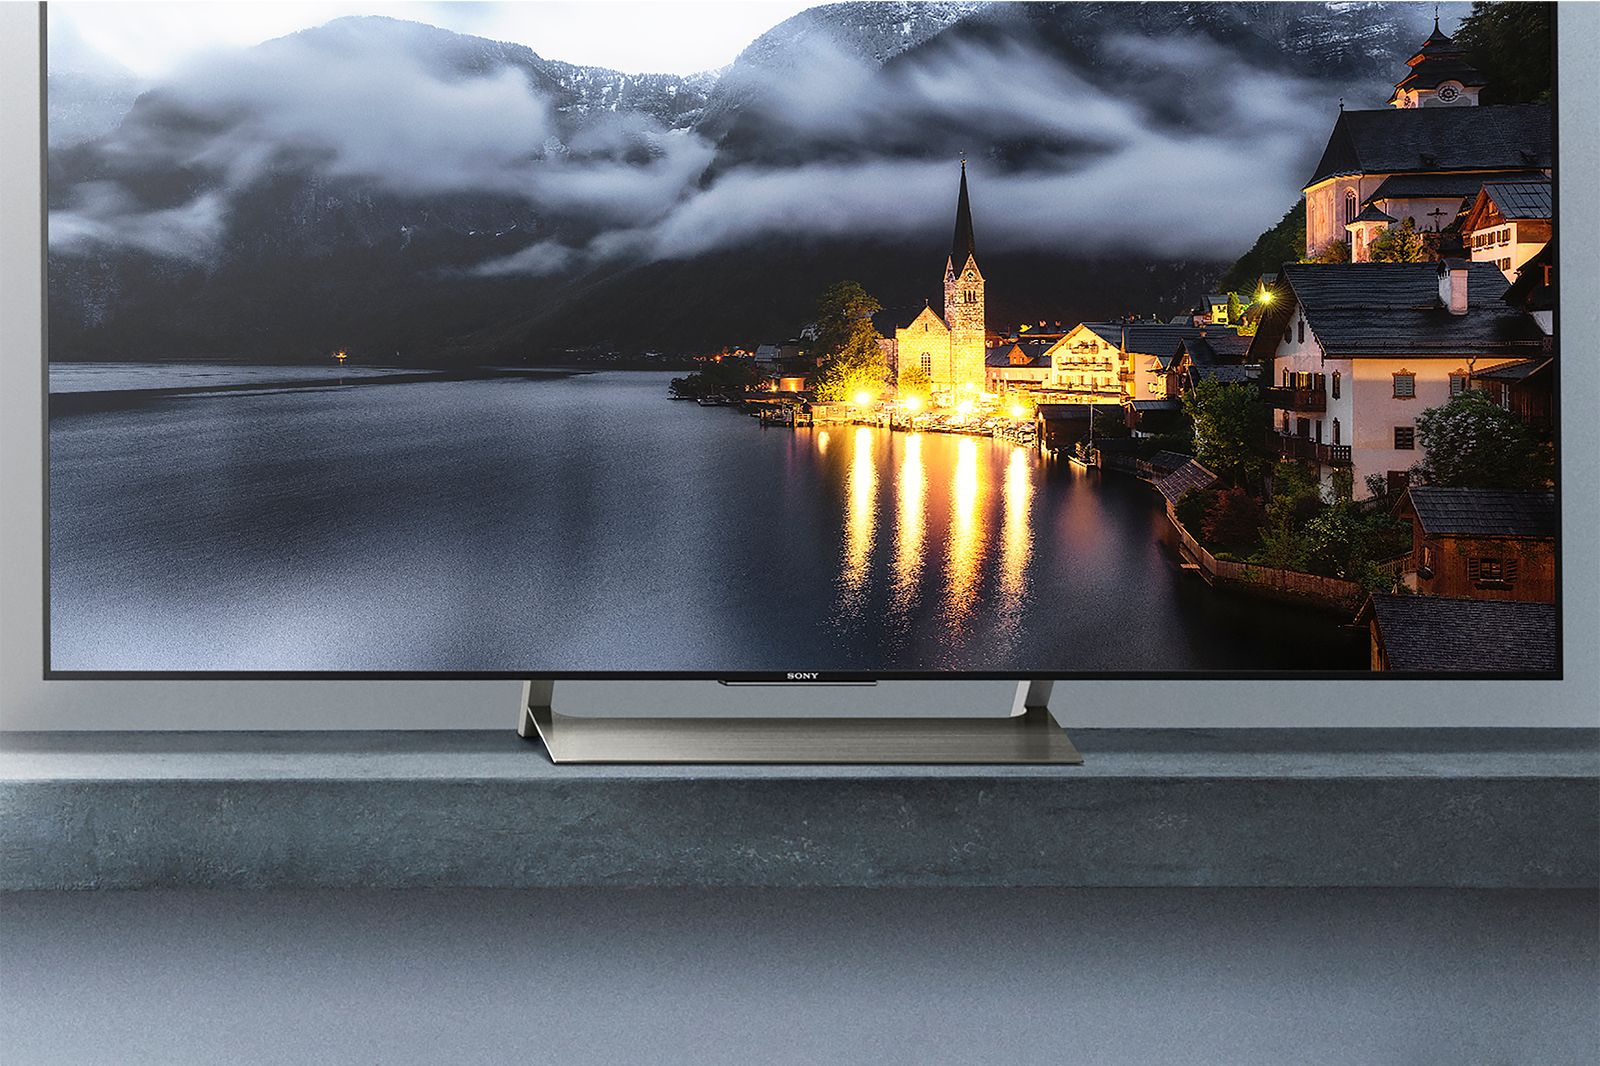 sony xe90 4k tv review image 2